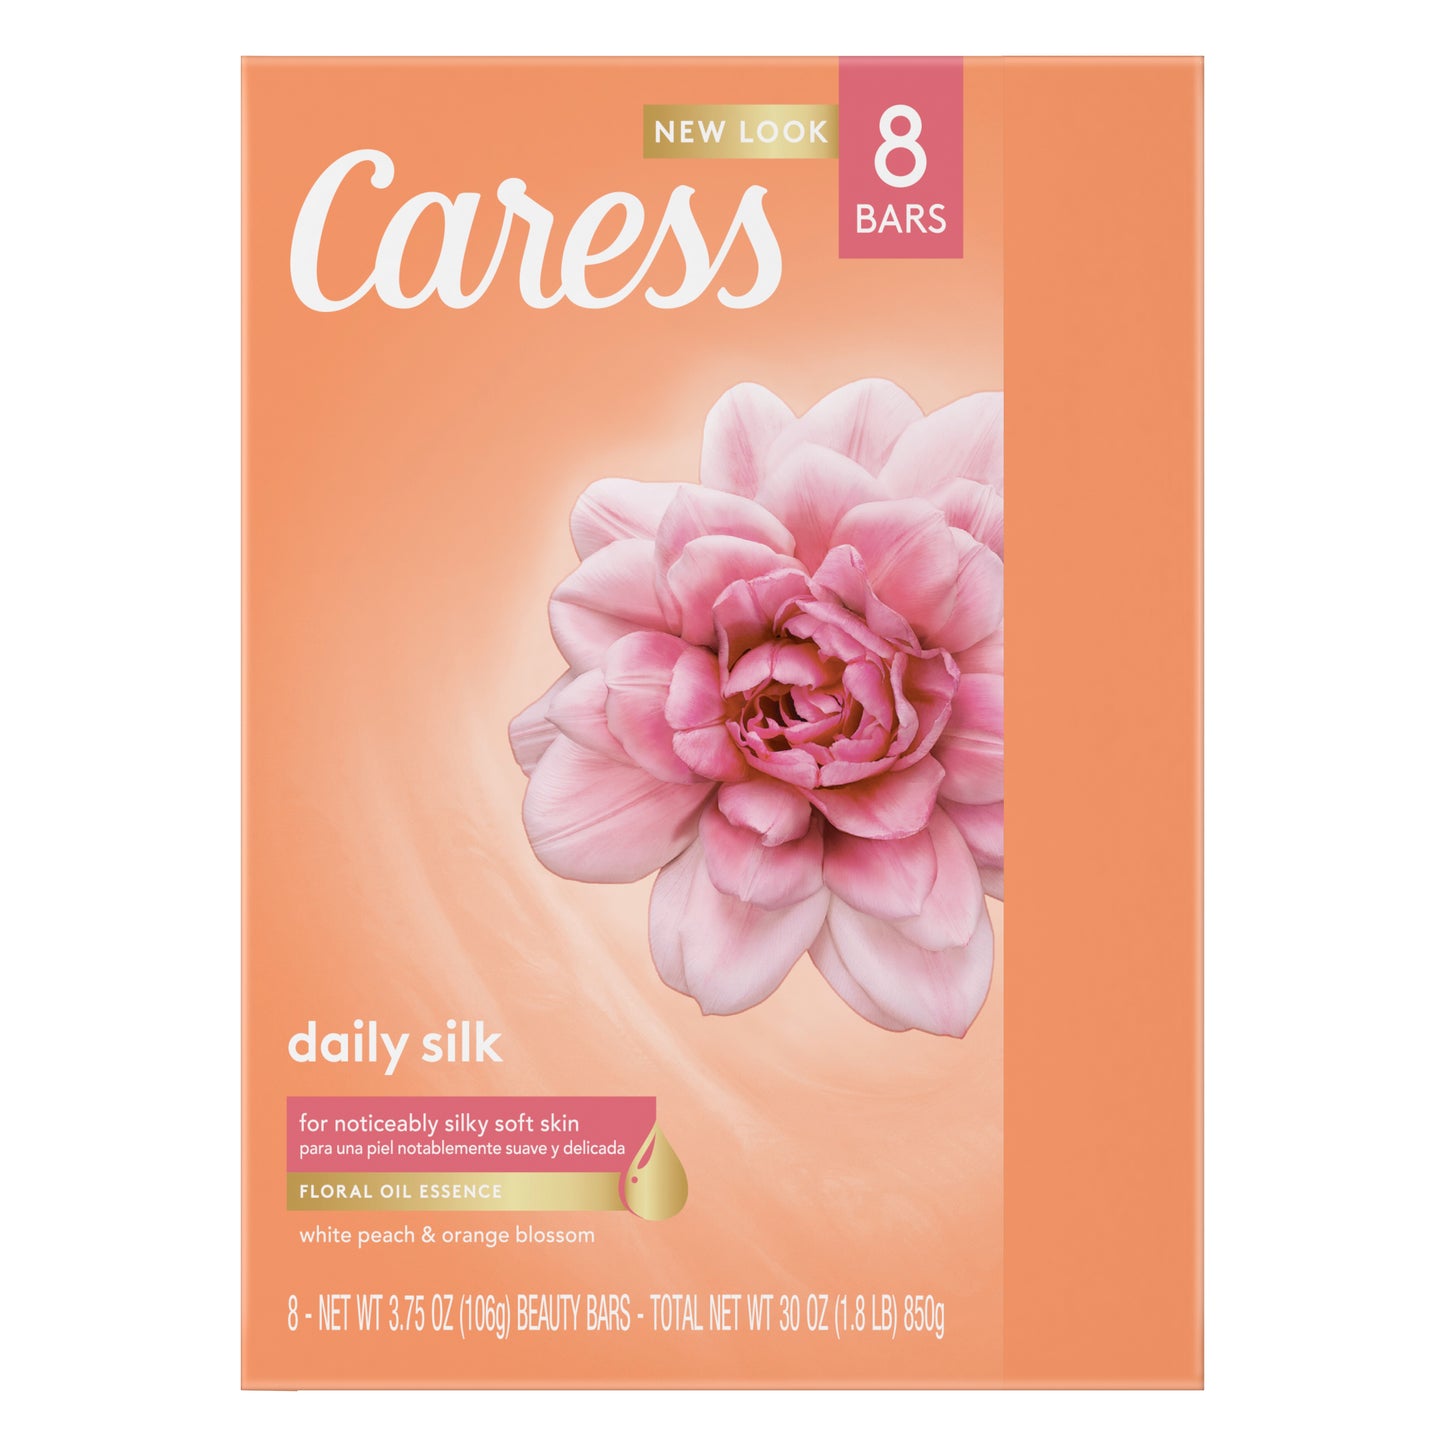 Caress Bar Soap for Silky, Soft Skin Daily Silk with Floral Fusion Oil 3.75 oz 8 Bars